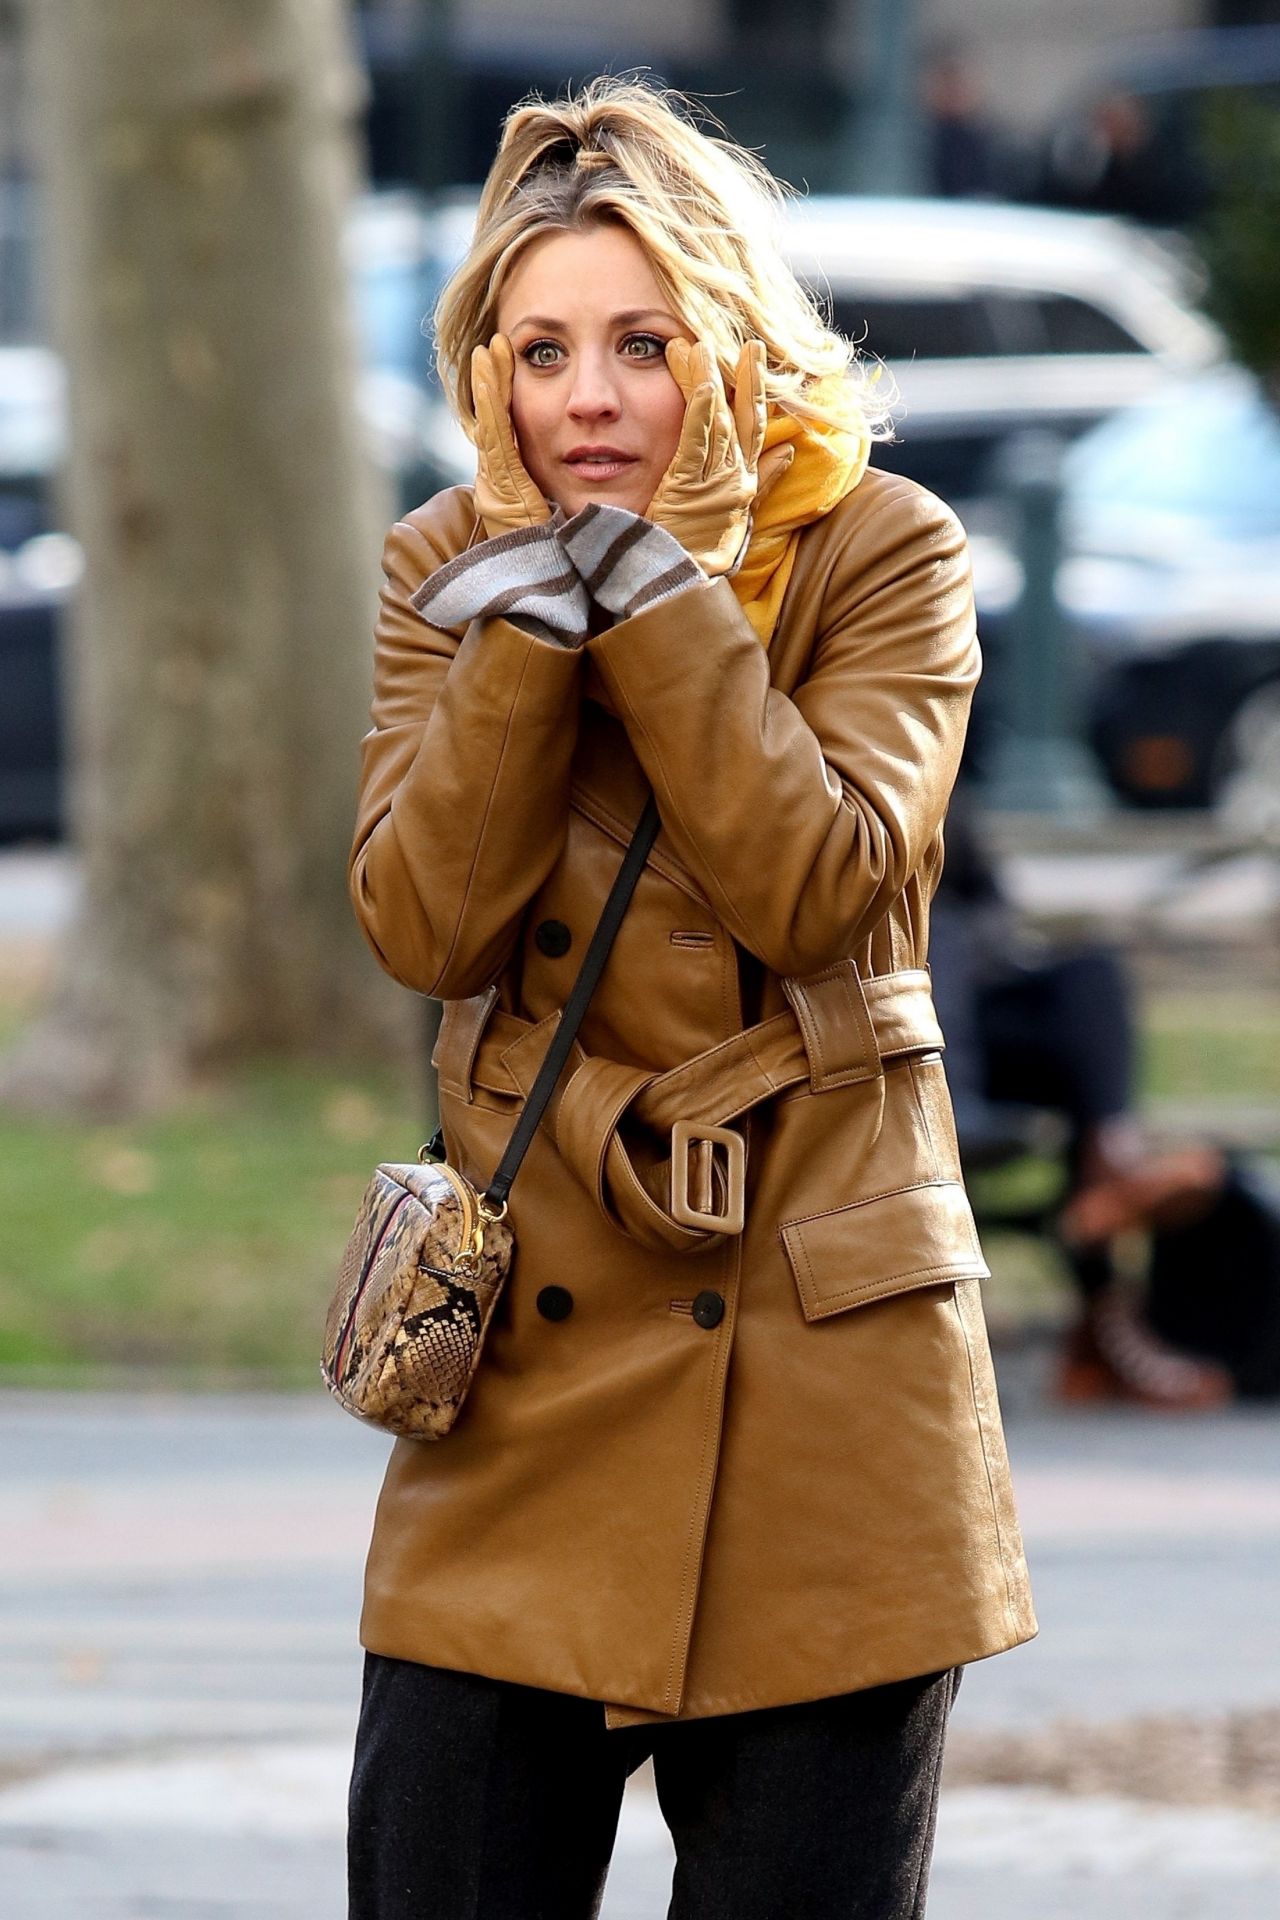 KALEY CUOCO on the Set of The Flight Attendant in New York 